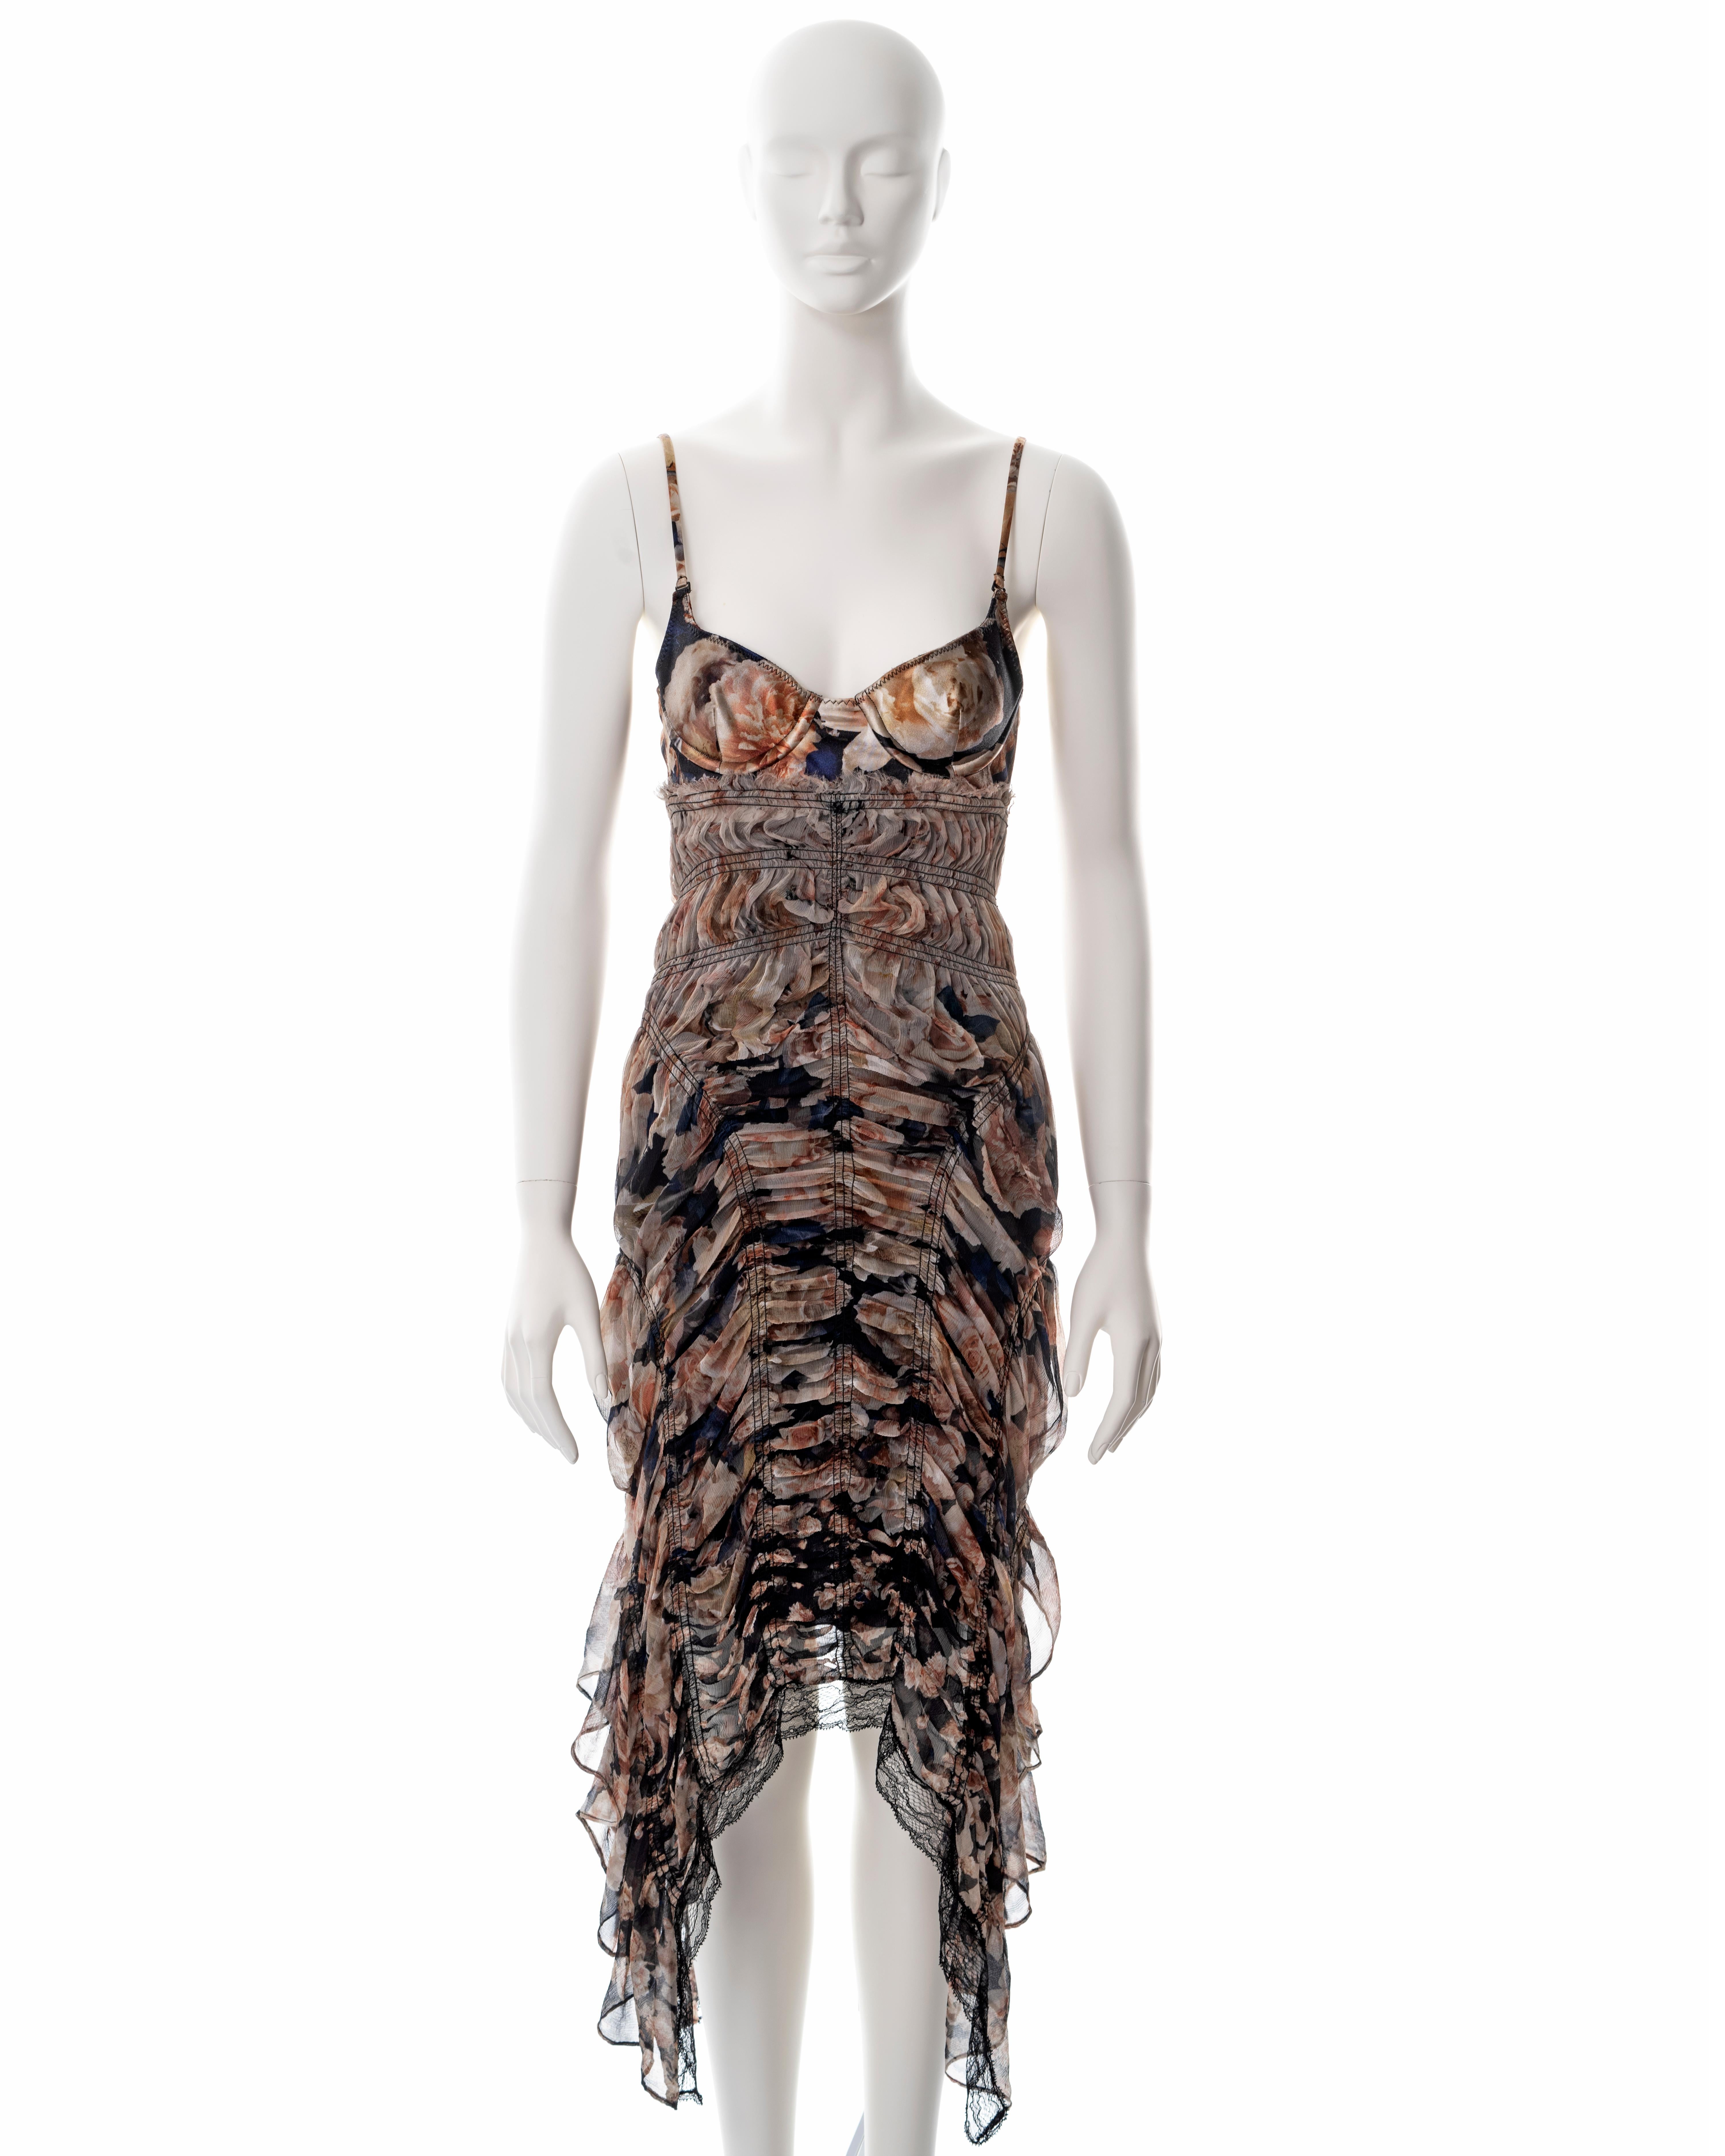 ▪ Jean Paul Gaultier floral printed smocked silk dress
▪ Sold by One of a Kind Archive
▪ Spring-Summer 2011
▪ Integrated bra with adjustable shoulder straps 
▪ Asymmetric hemline 
▪ Black lace trim
▪ FR 36 - UK 8 - US 6
▪ Made in Italy

All